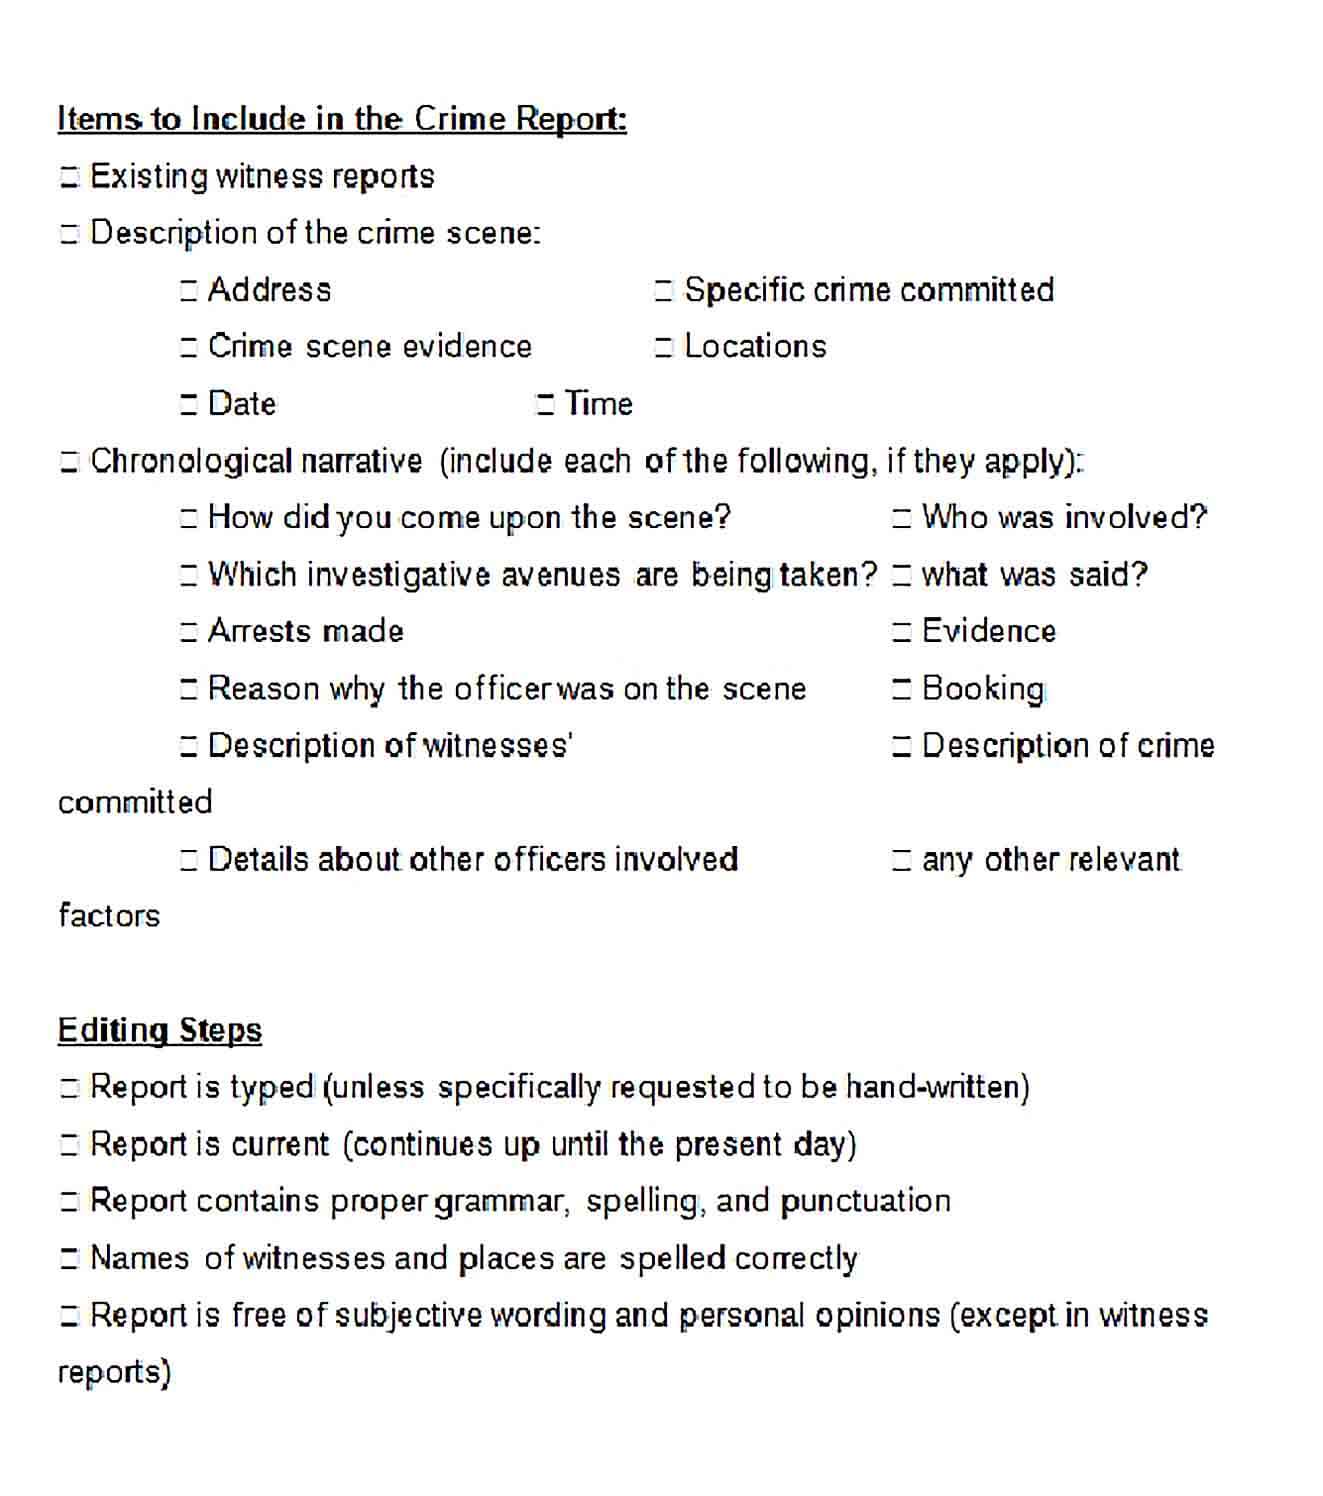 Sample Items to Include in a Crime Report Template 2